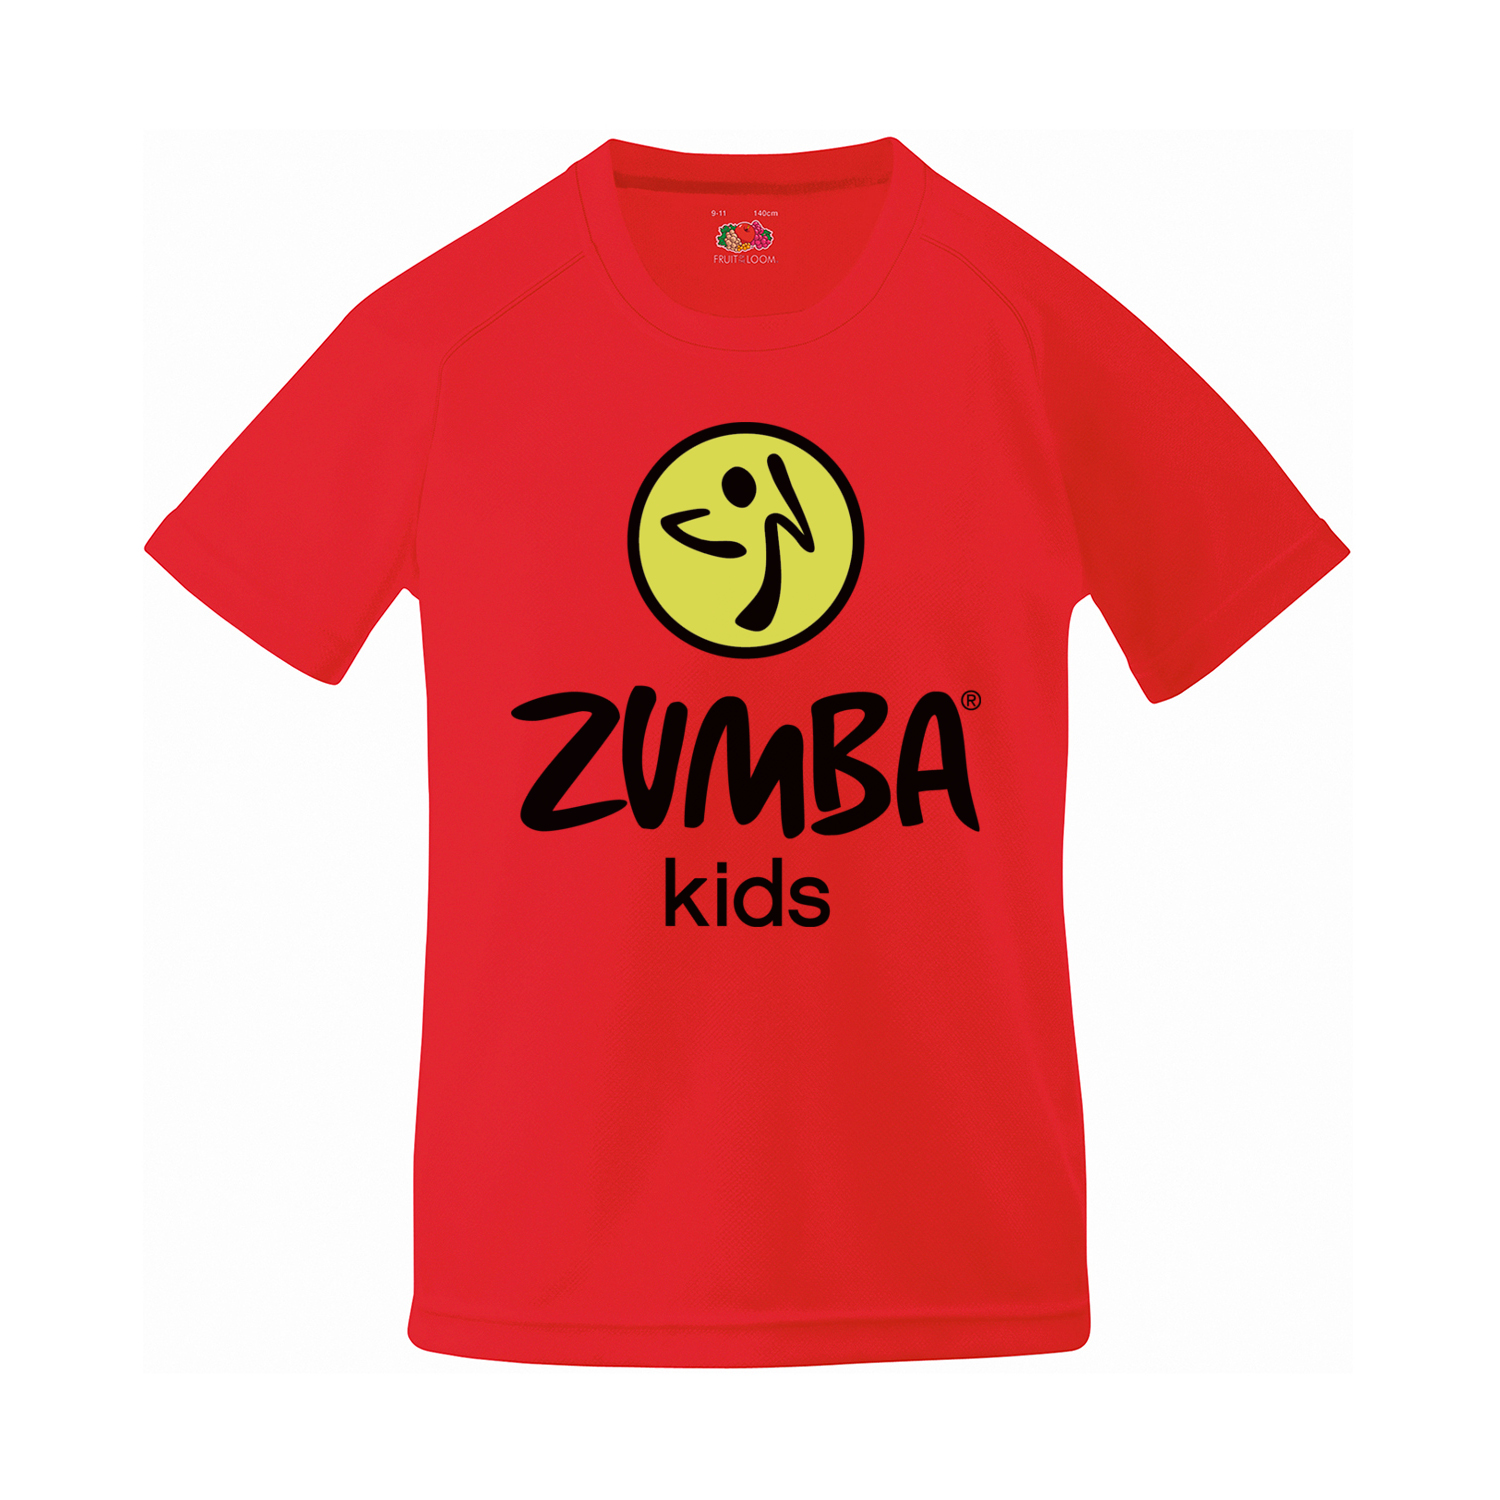 Promotional Kids Sports Top